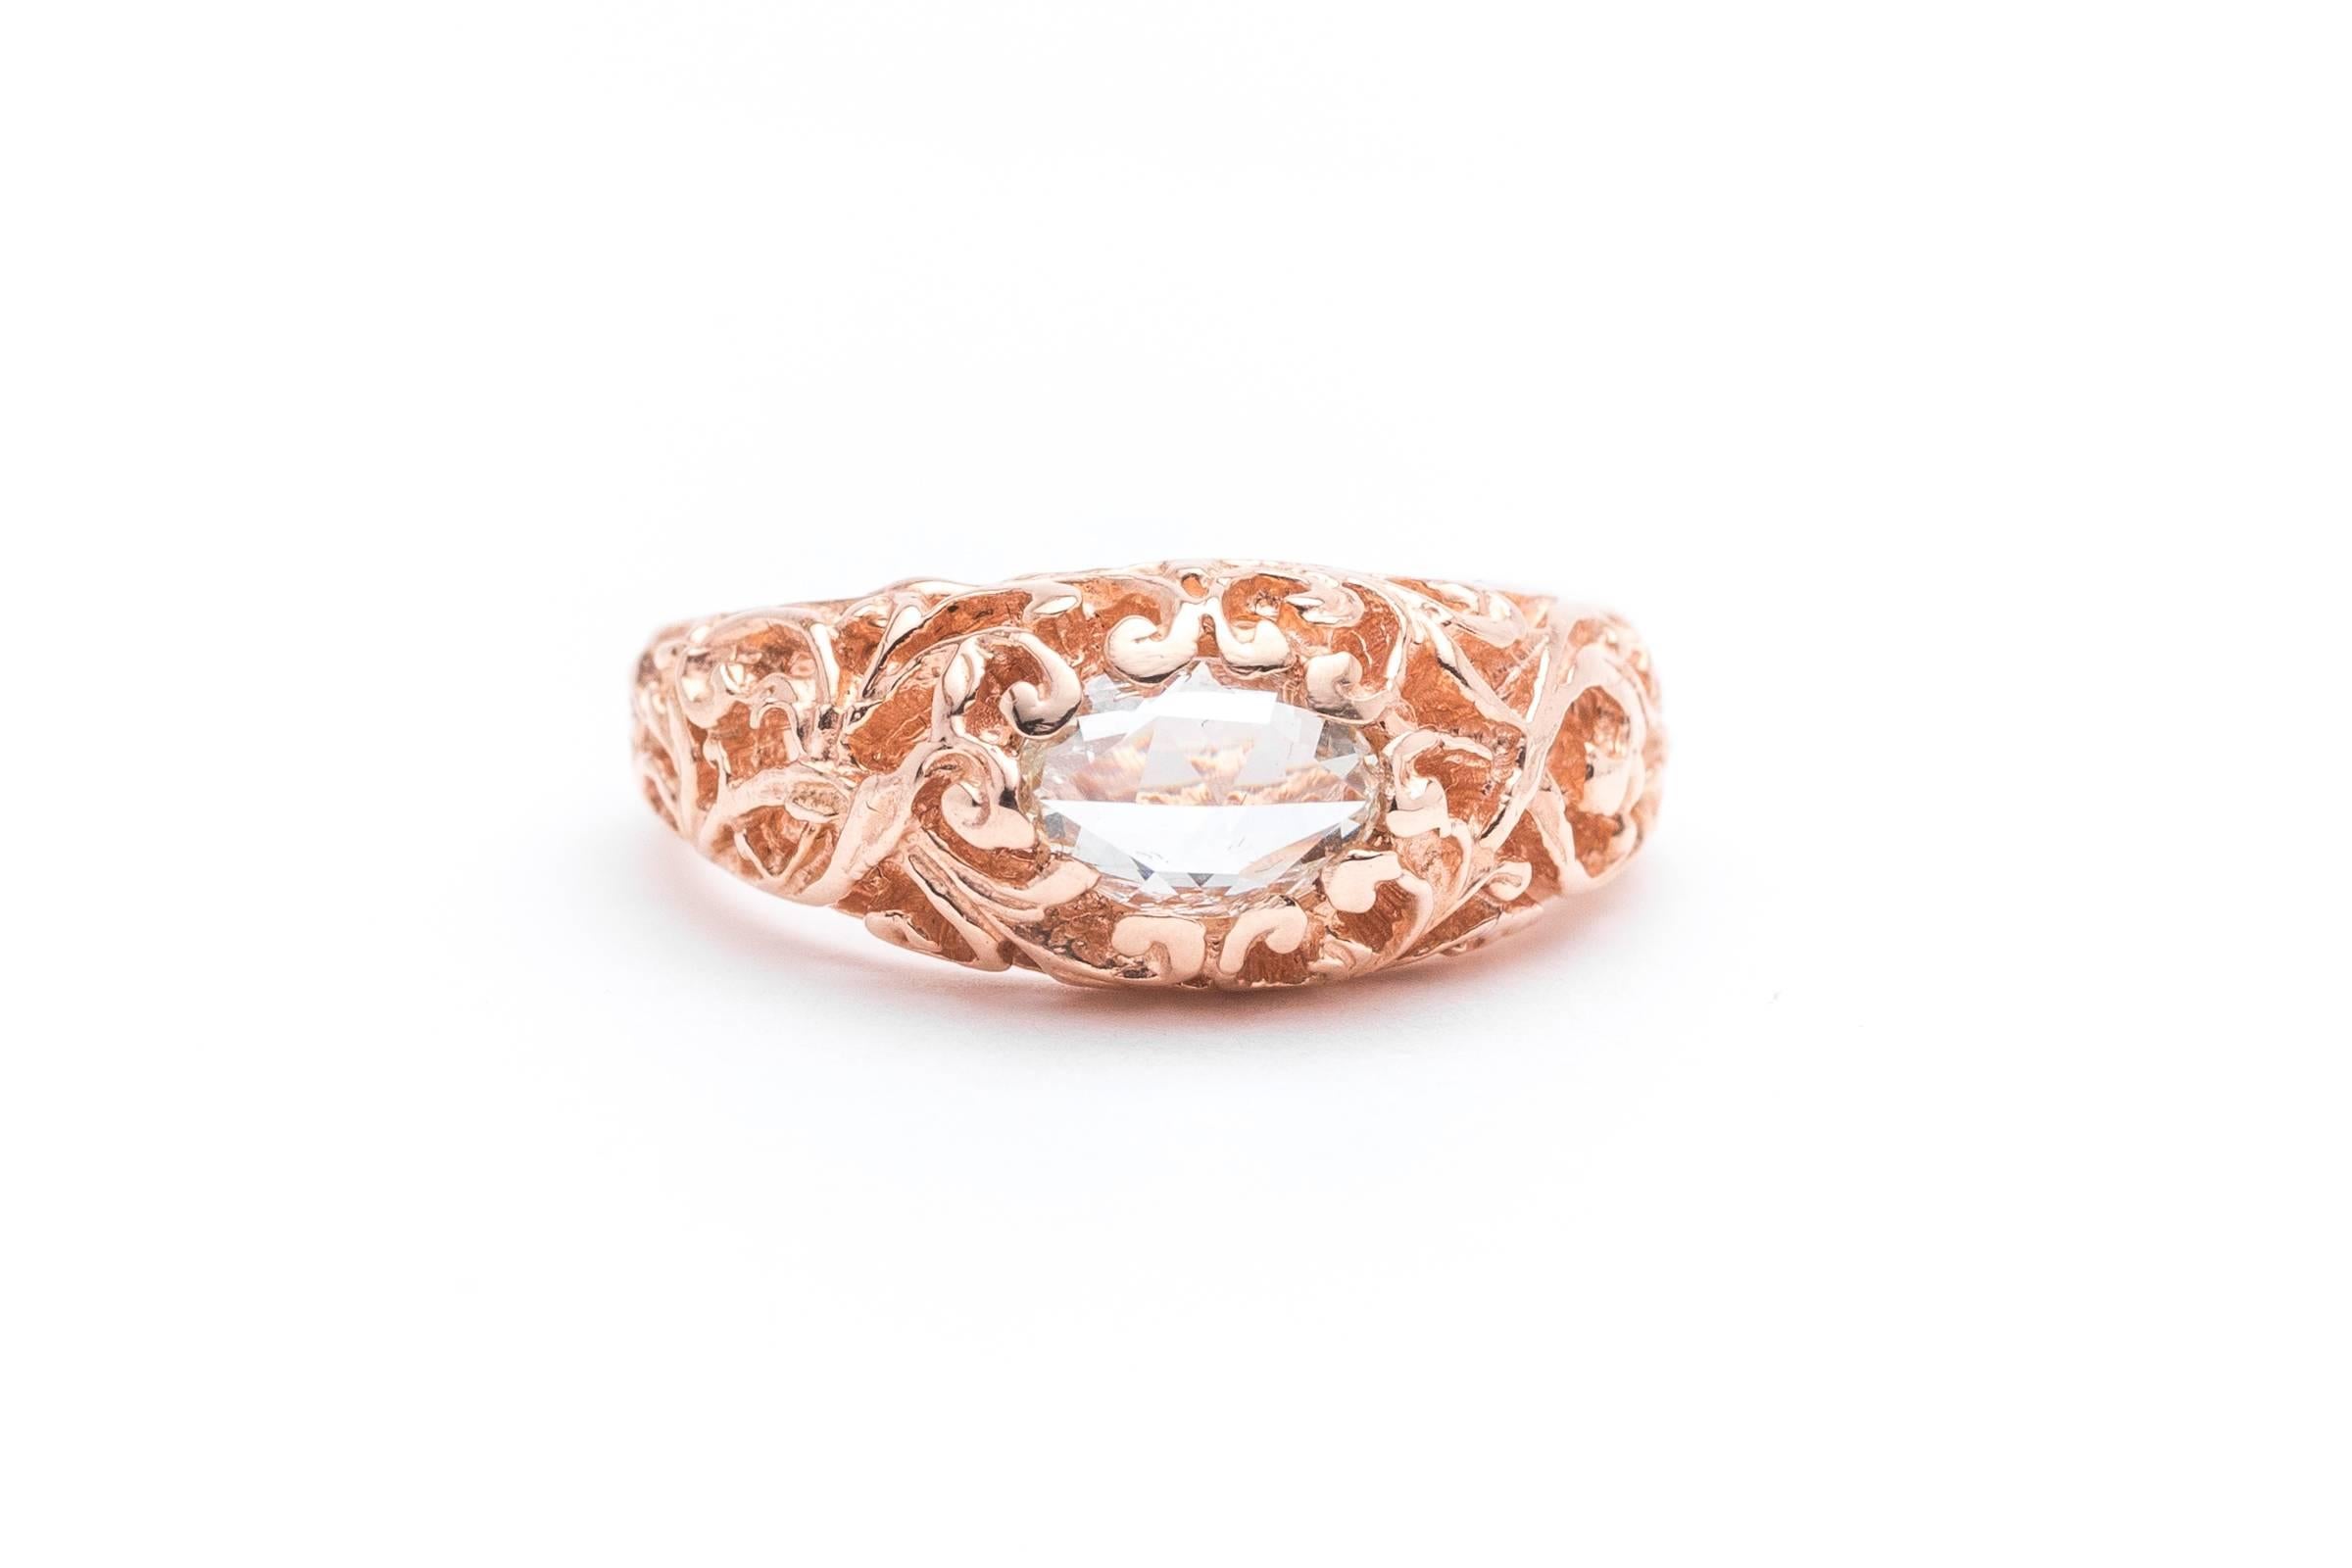 Beacon Hill Jewelers Presents:

A glorious handmade Georgian style rose cut diamond ring in rich 14 karat rose gold. Centered by an elongated rose cut diamond set east to west, this ring features a fantastic hand carved scroll motif